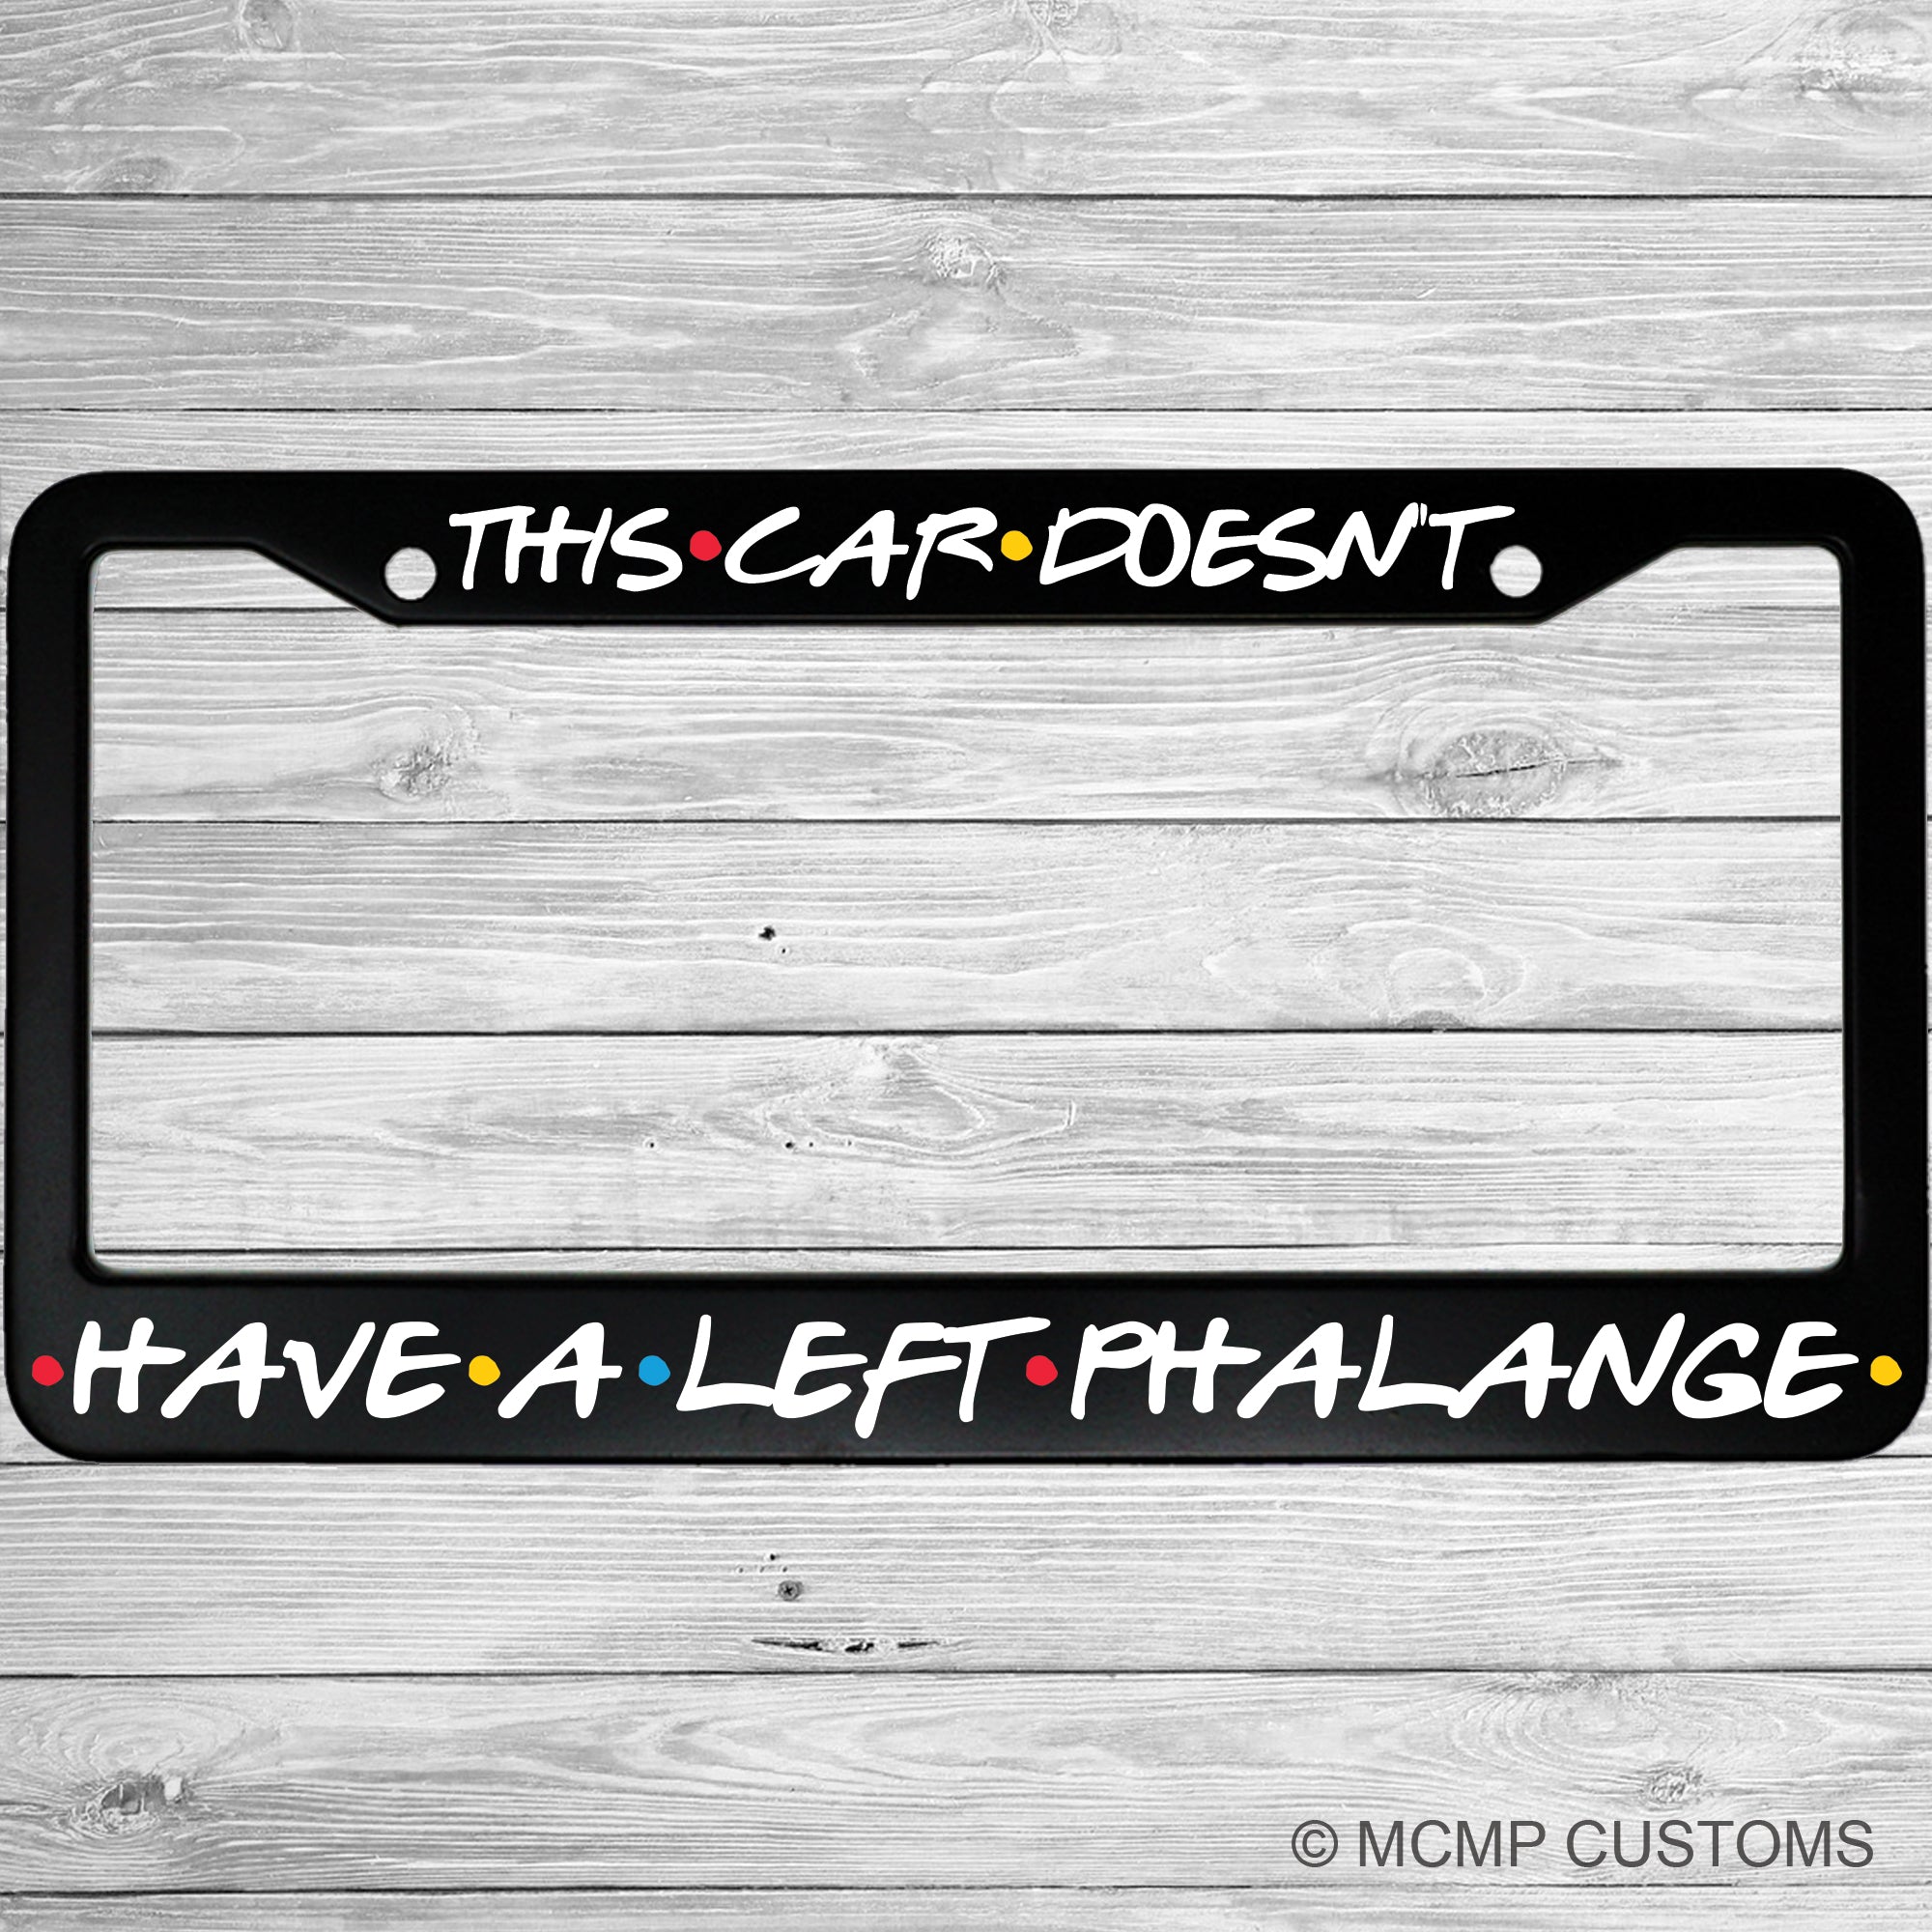 This Car Doesn't Have A Left Phalange